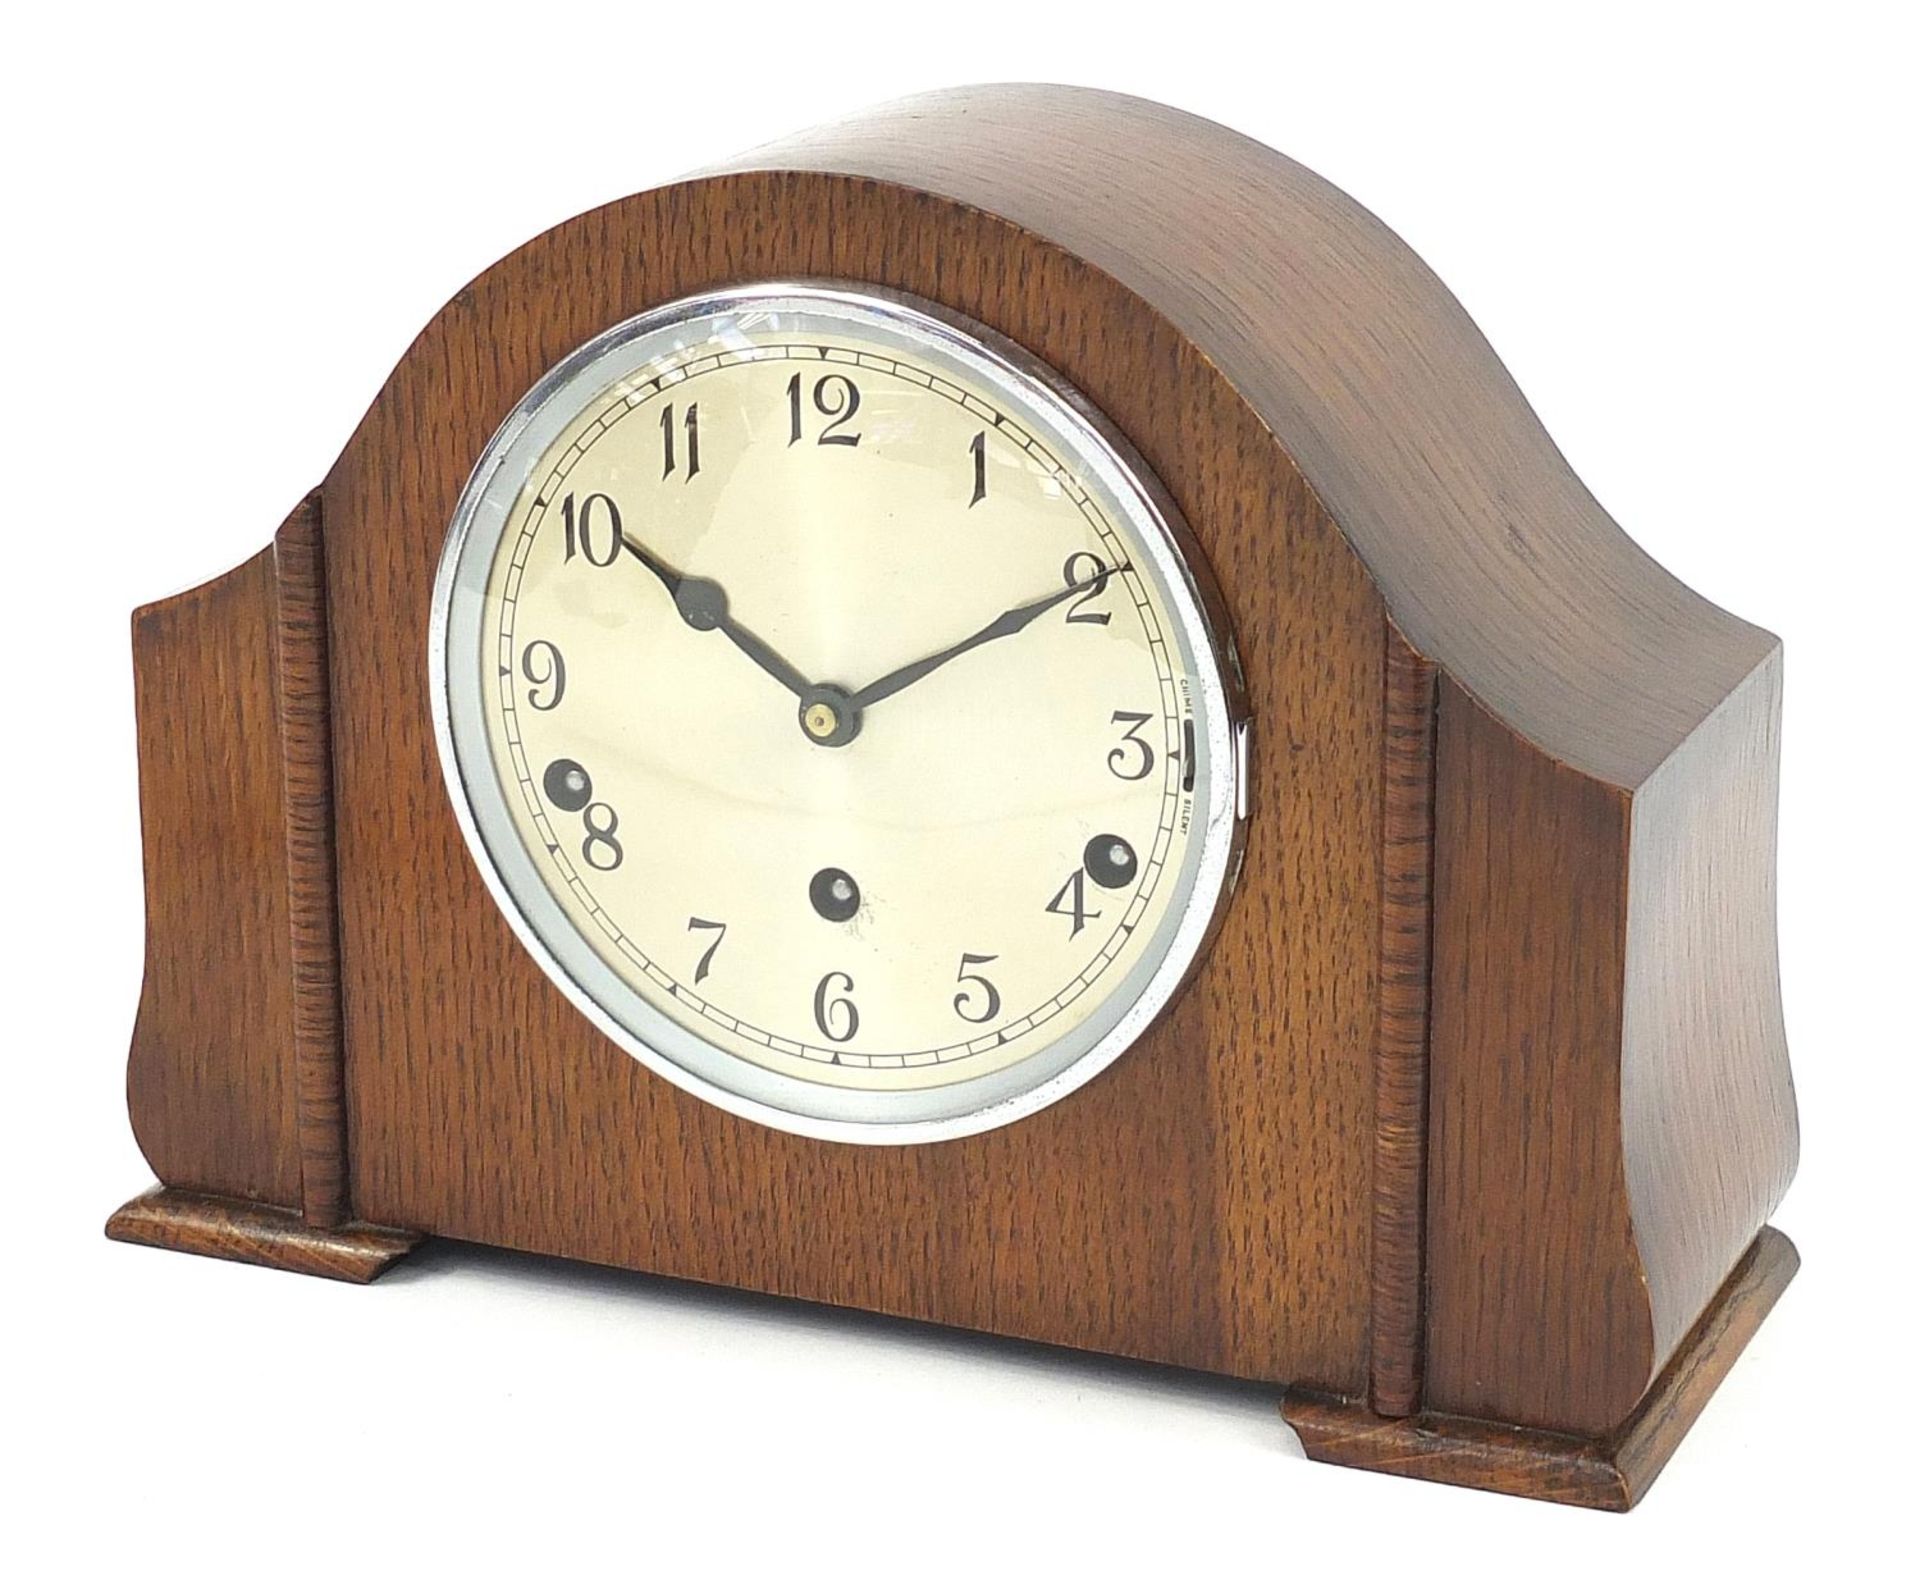 Mahogany mantle clock with Westminster chime, 30.5cm wide